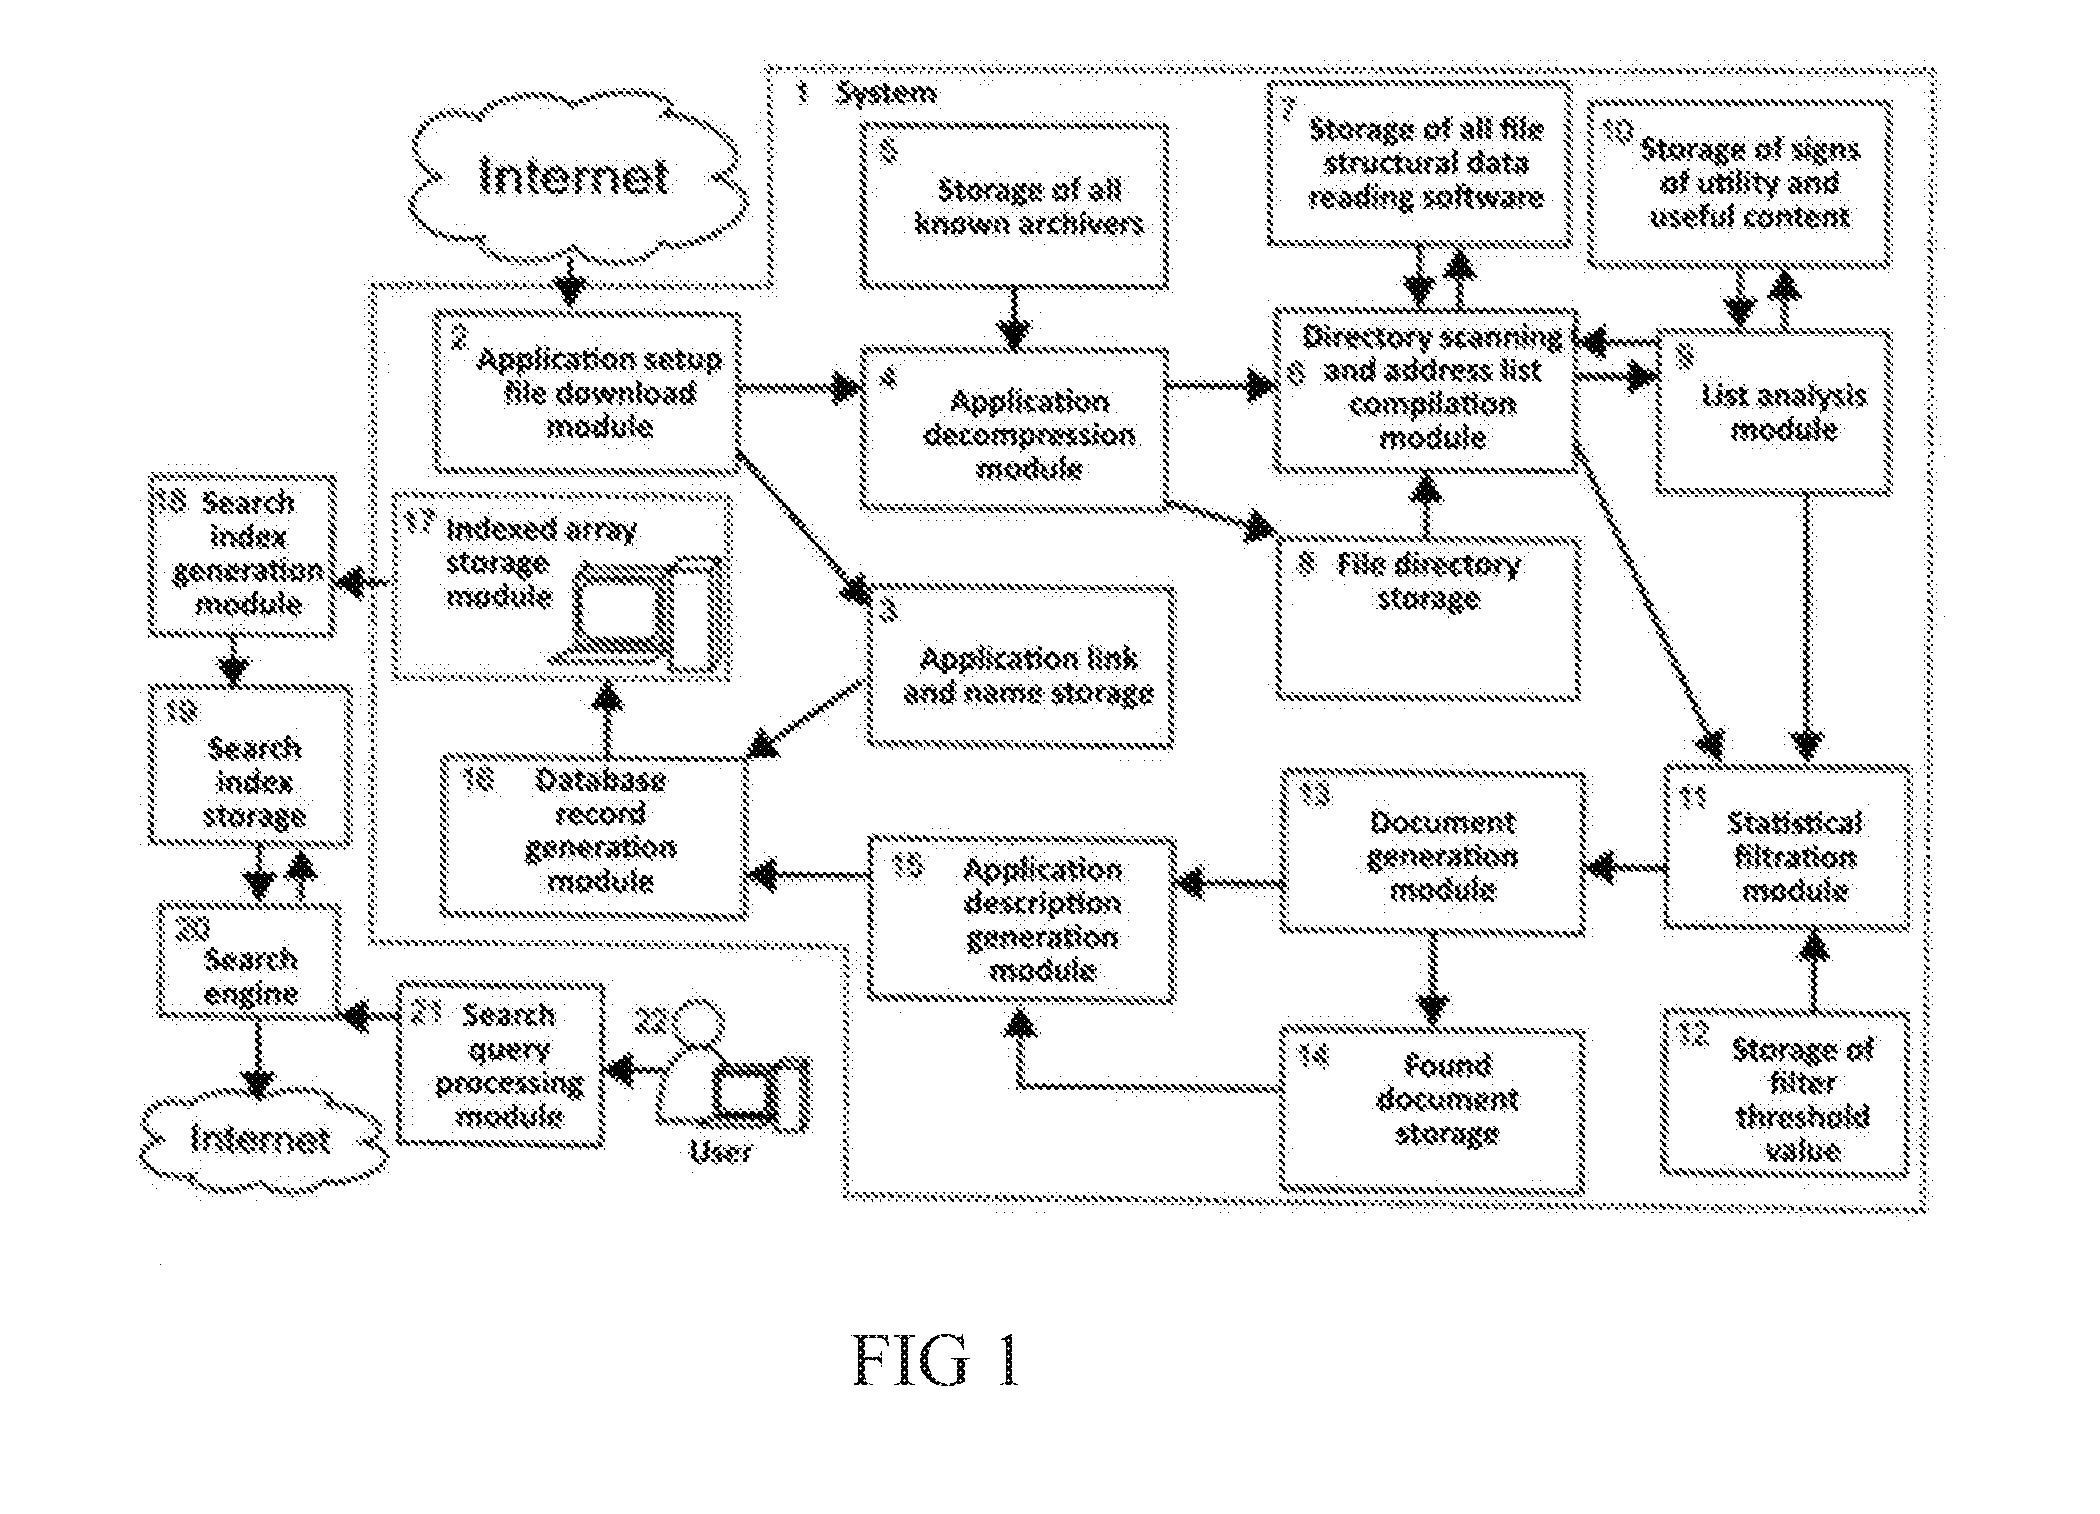 Method for Extracting Useful Content from Setup Files of Mobile Applications